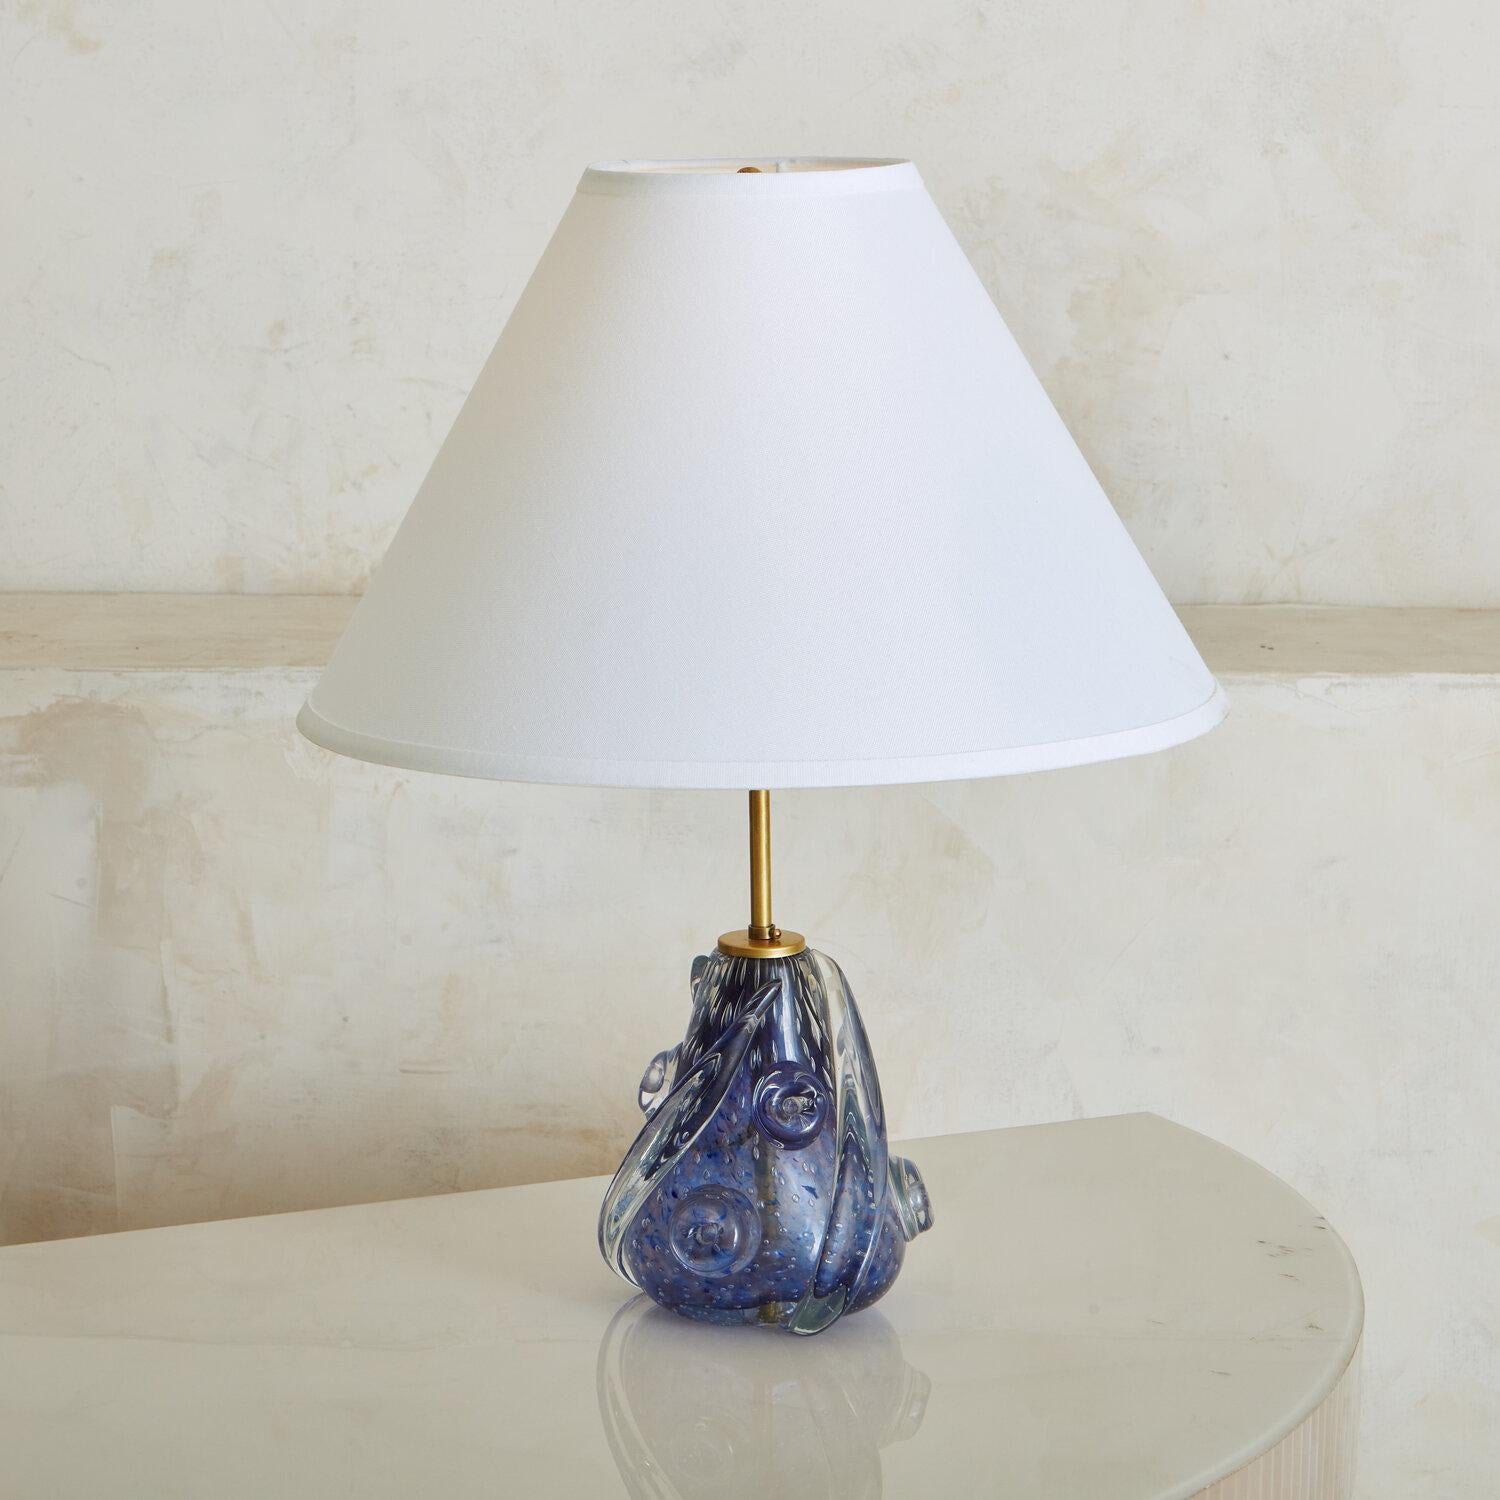 A stunning lavender Murano glass table lamp attributed to Barovier & Toso. This lamp was handblown using the bullicante technique, in which several layers of controlled air bubbles are overlaid in a grid pattern to create tiny depressions imprinted